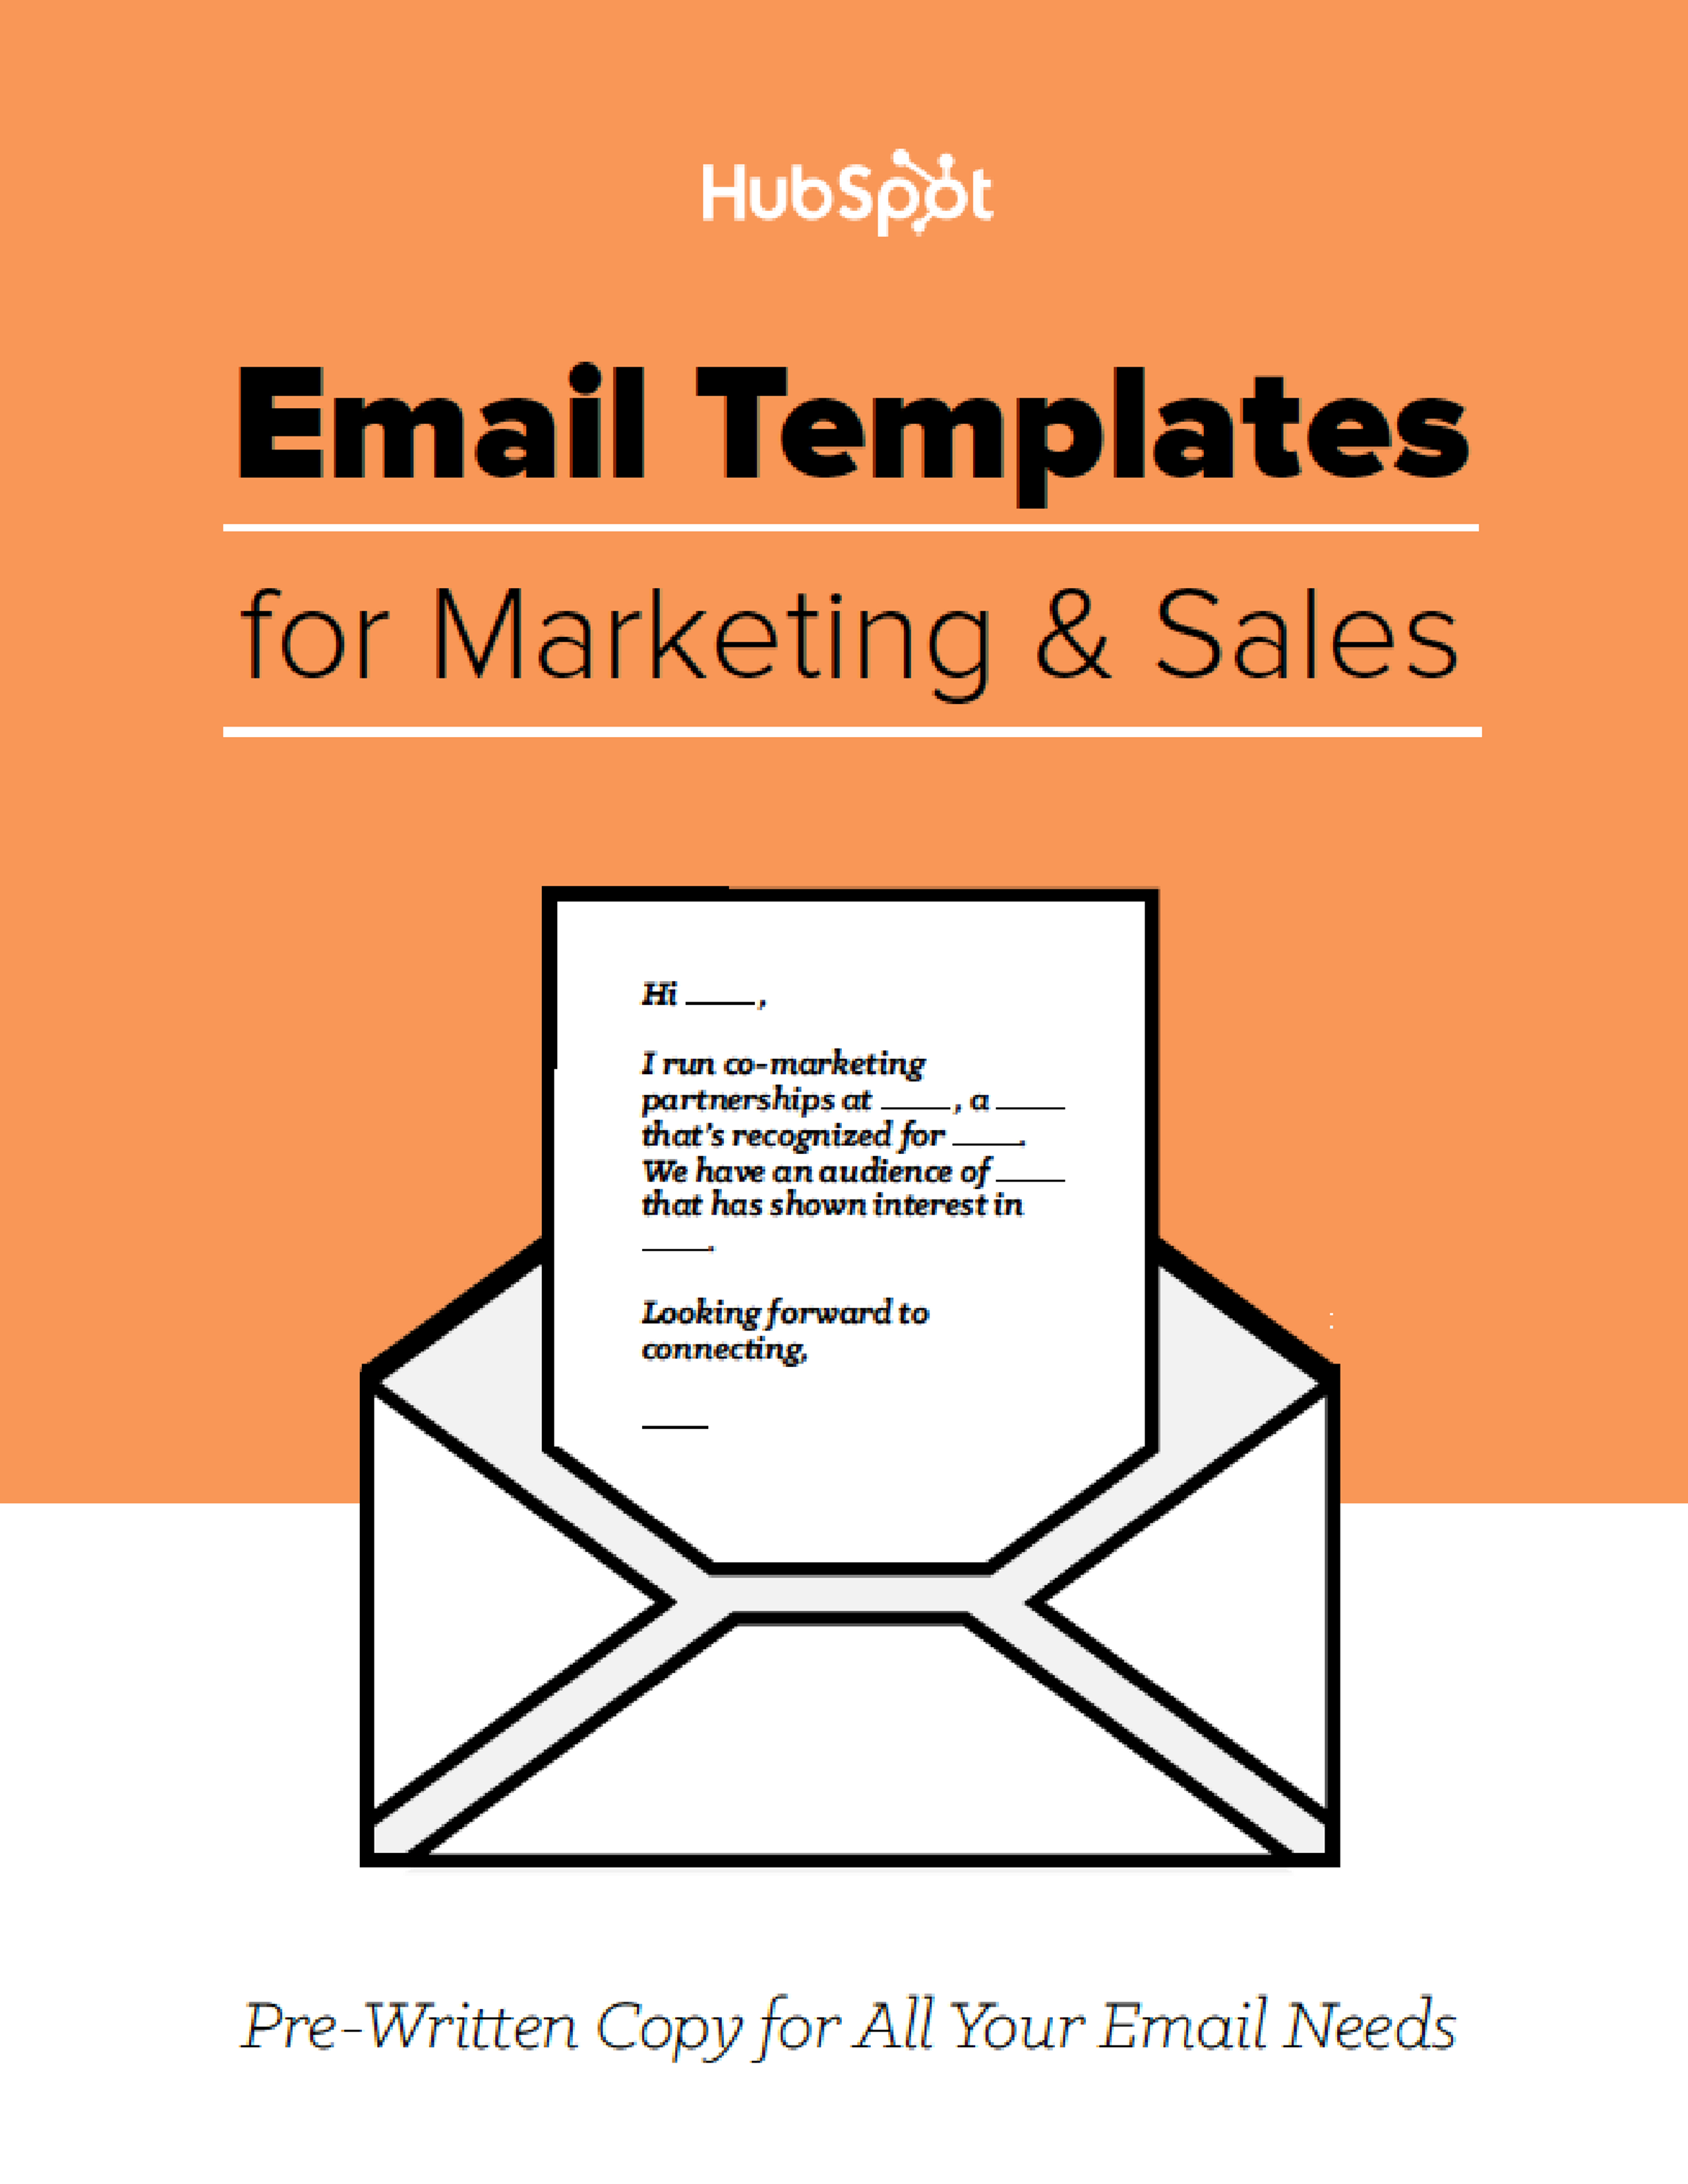 Email templates for startups and entrepreneurs